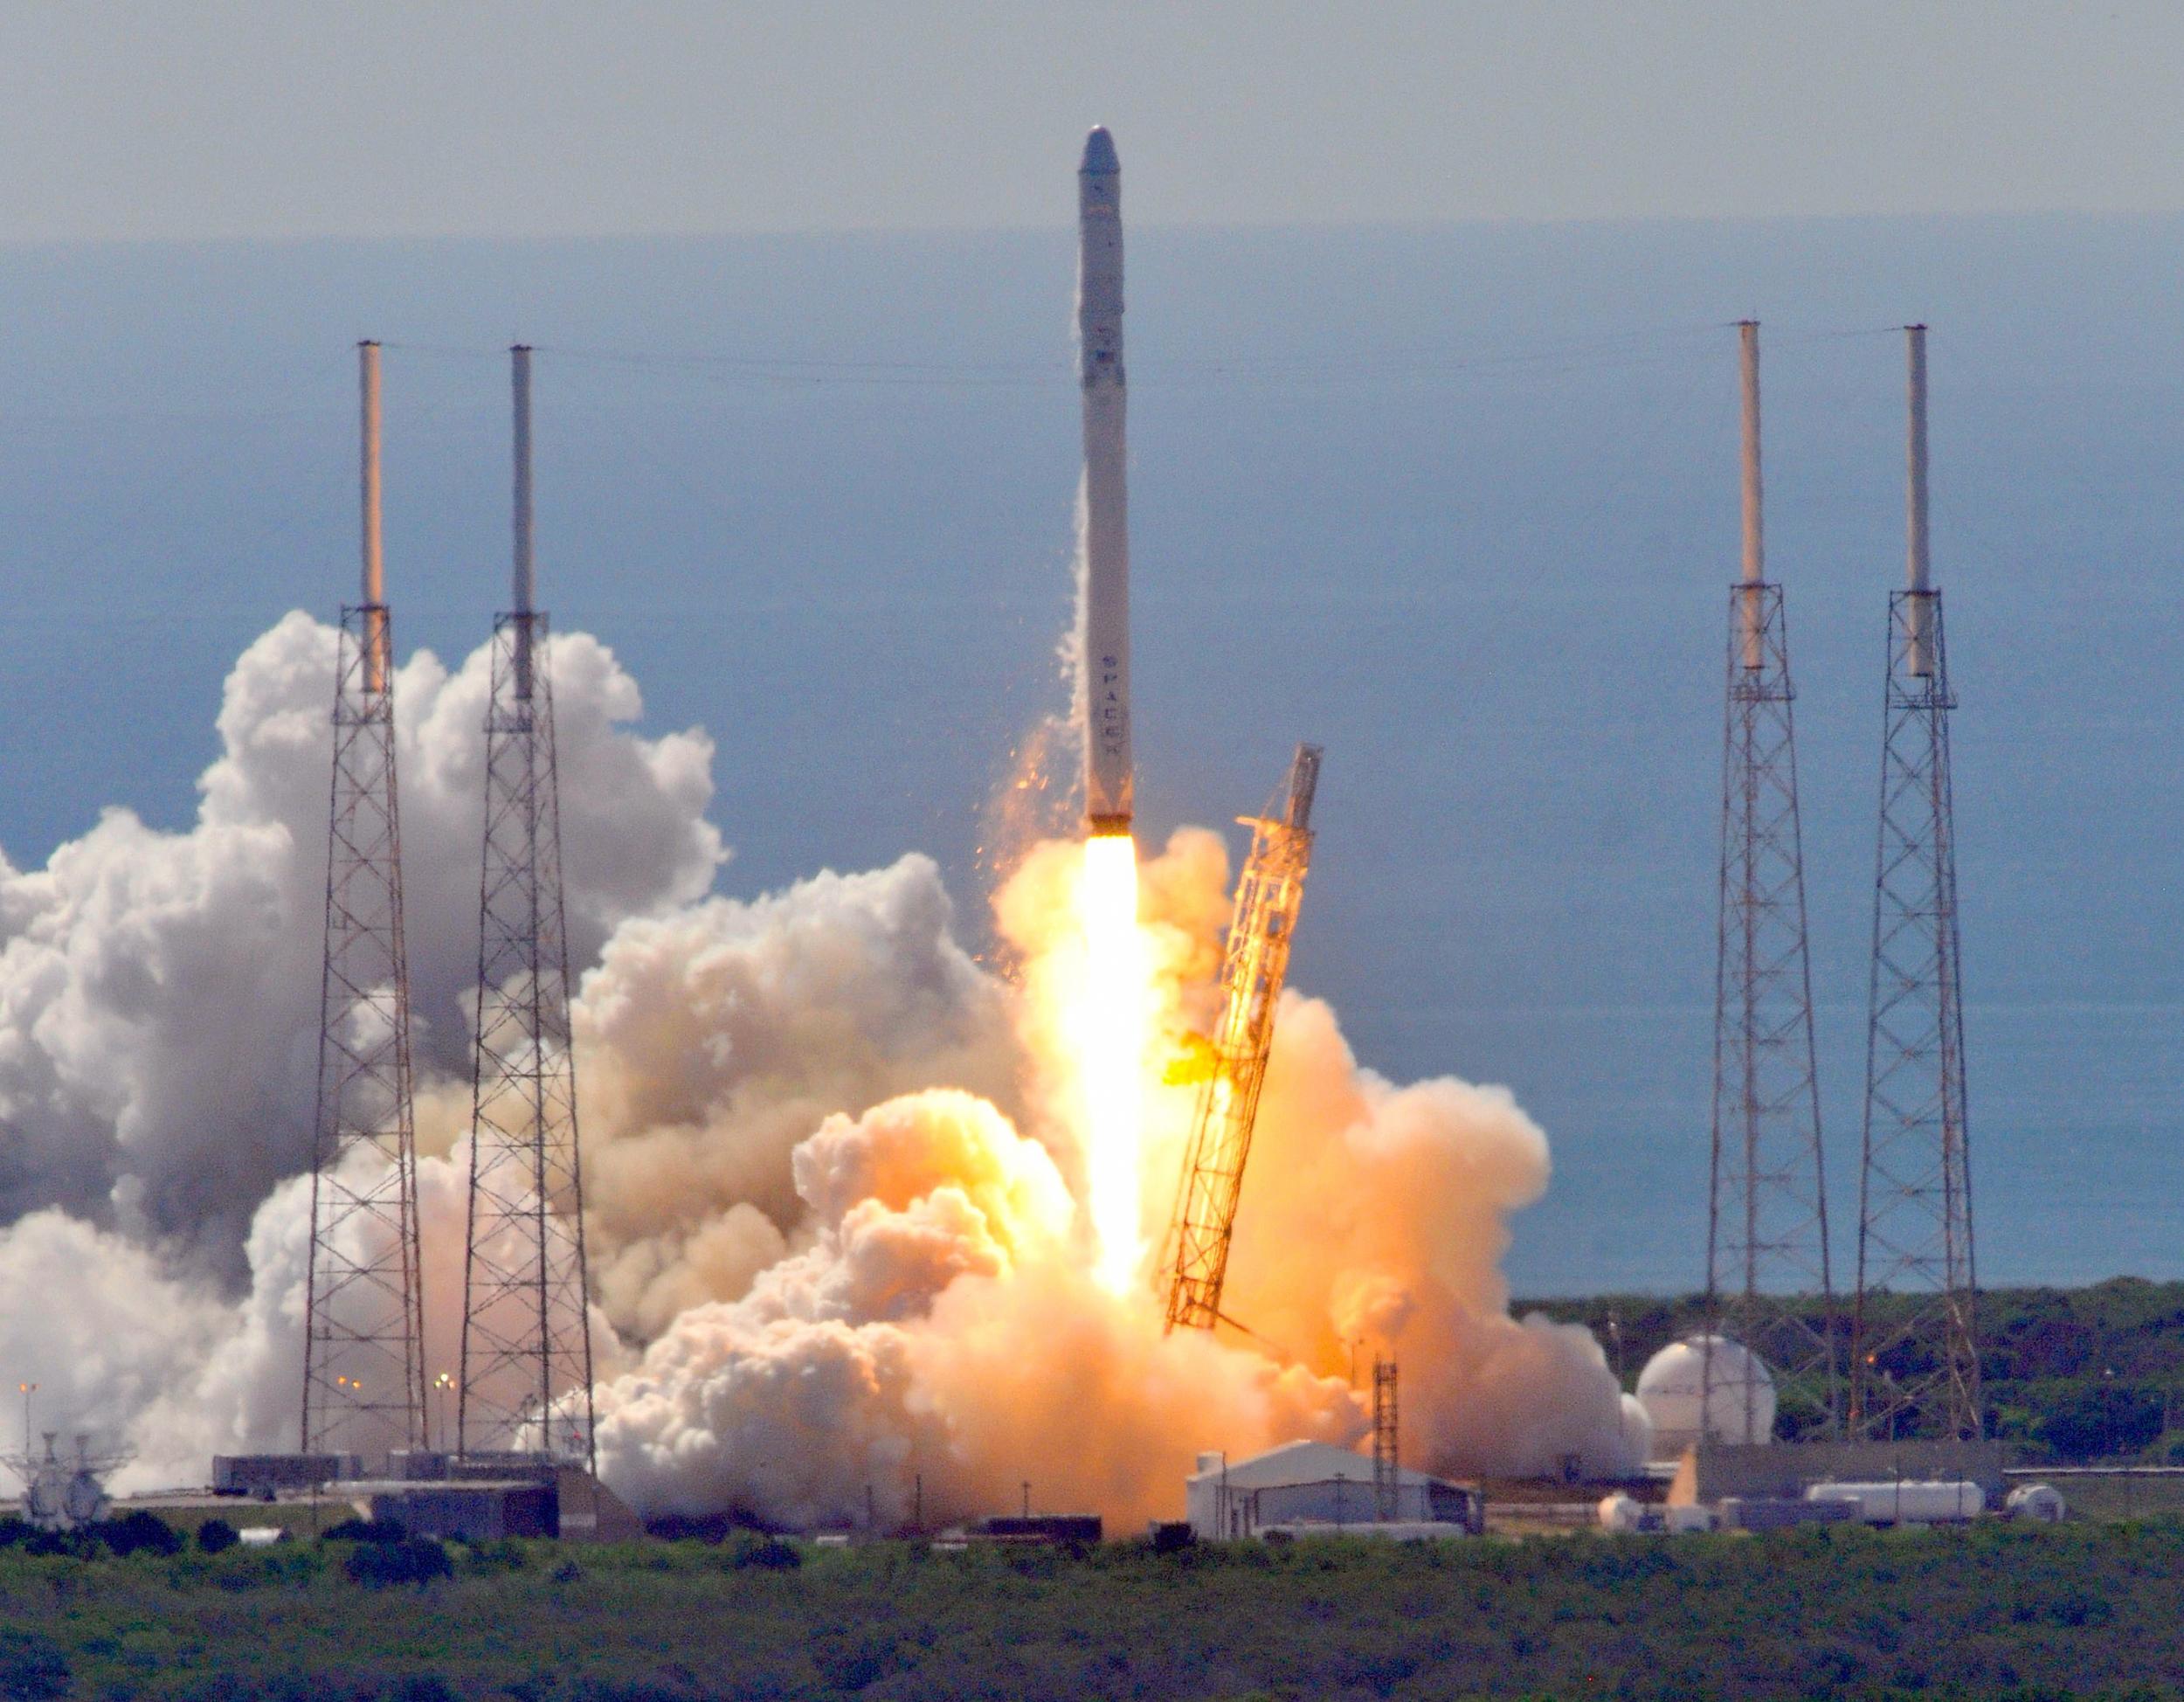 How To Watch The Historic Spacex Falcon 9 Launch And Vertical Landing